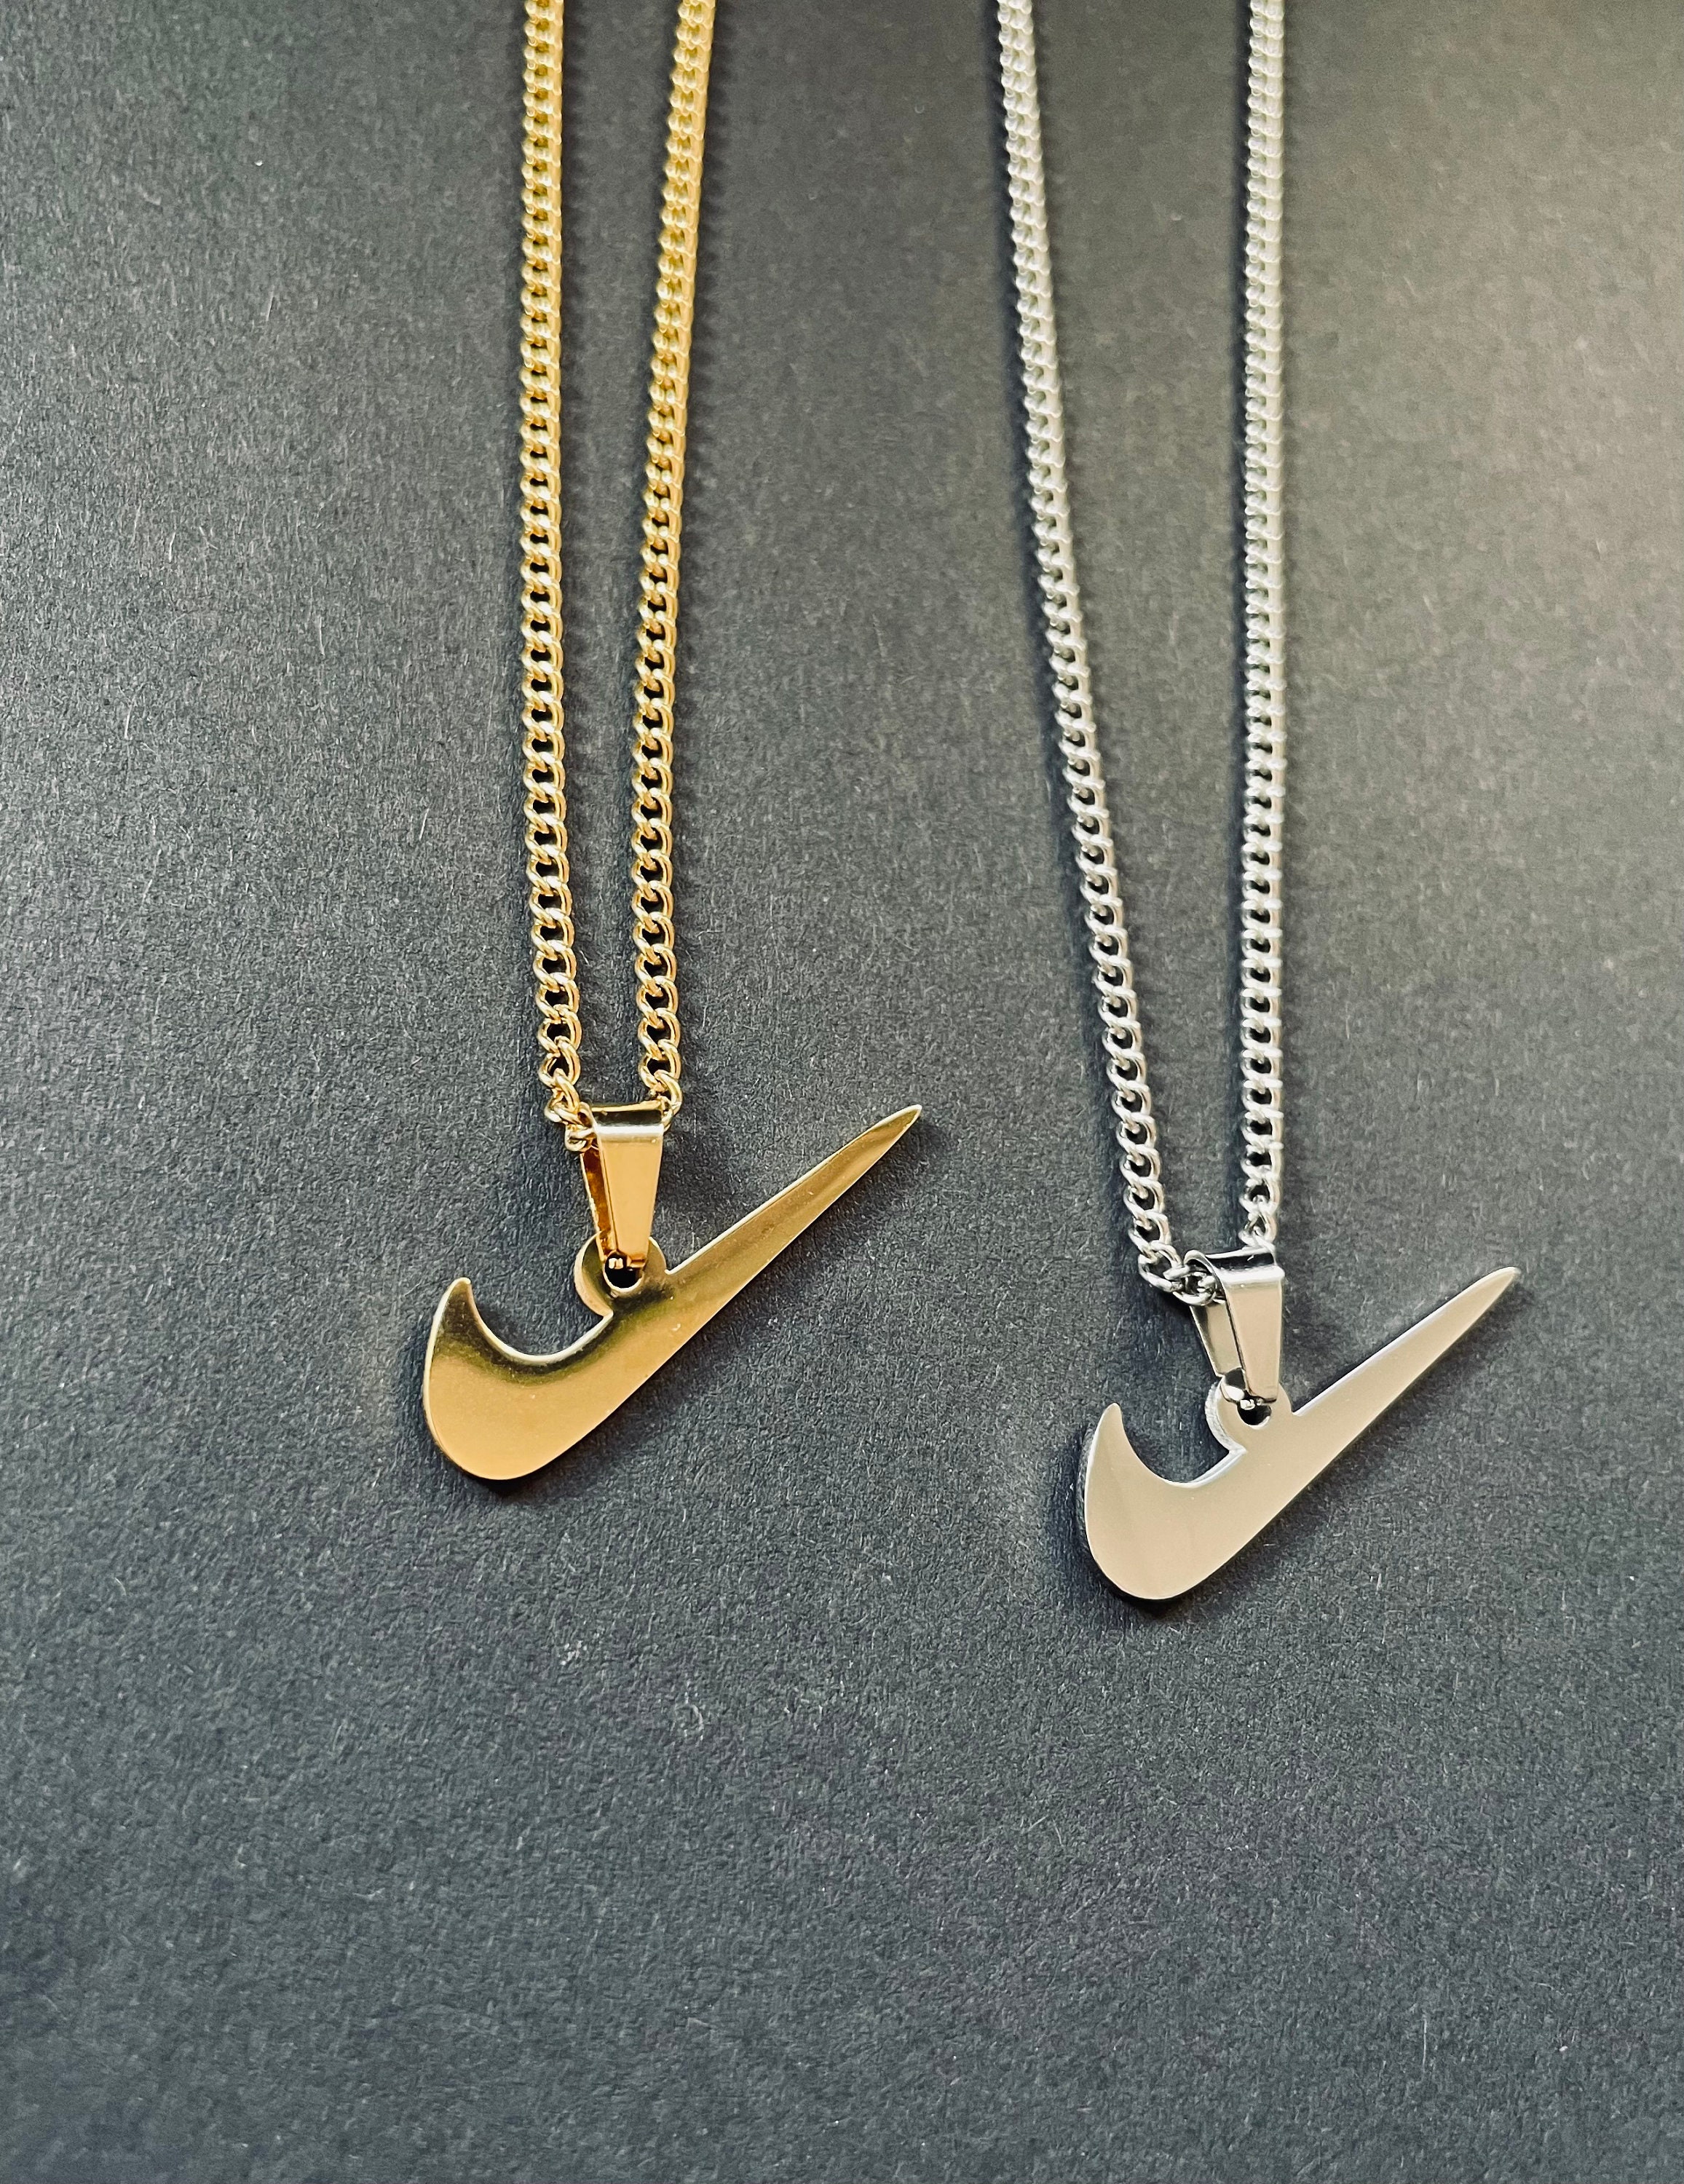 Nike swoosh necklace, gold and silver, slavonic chain, vintage Nike, unisex  necklace